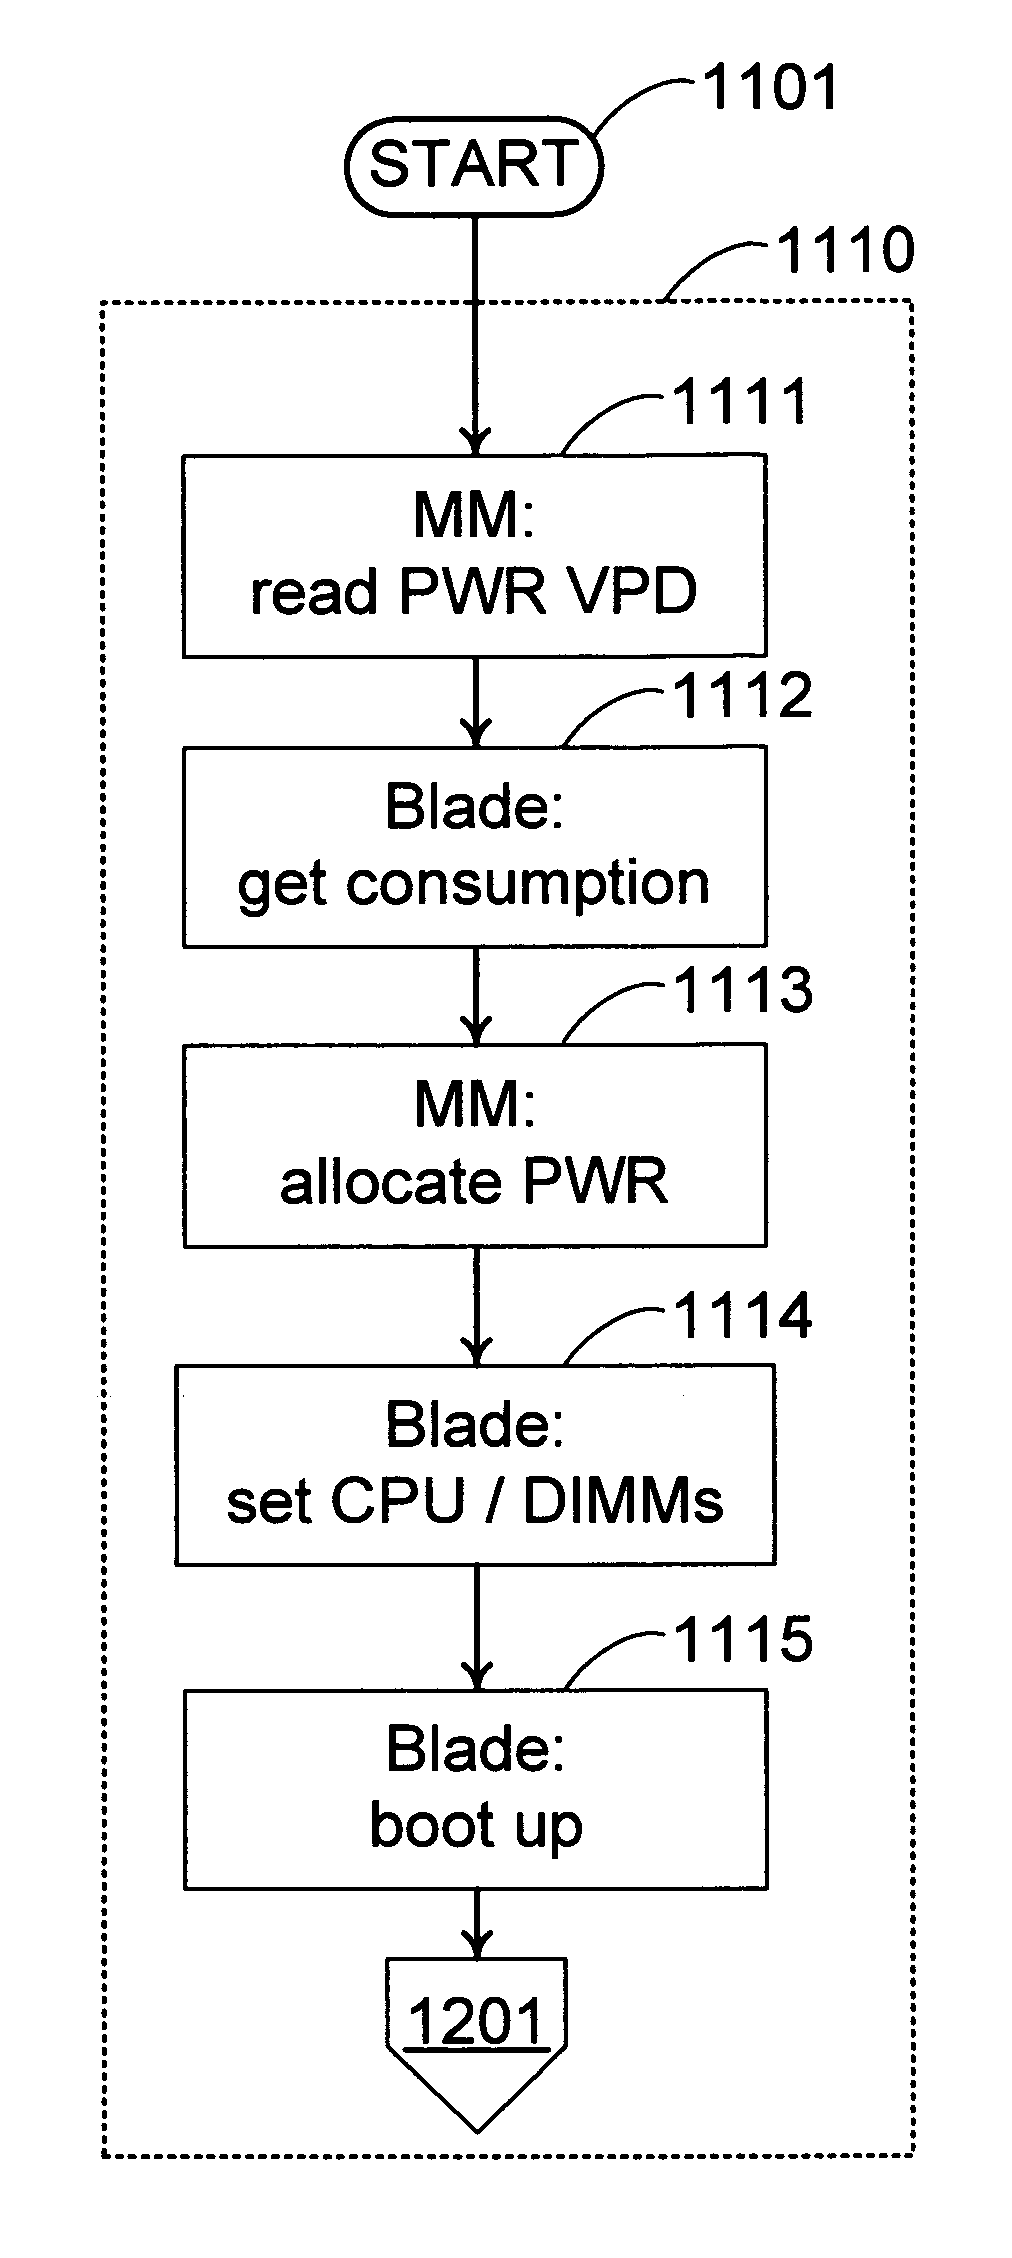 Method for maximizing server utilization in a resource constrained environment